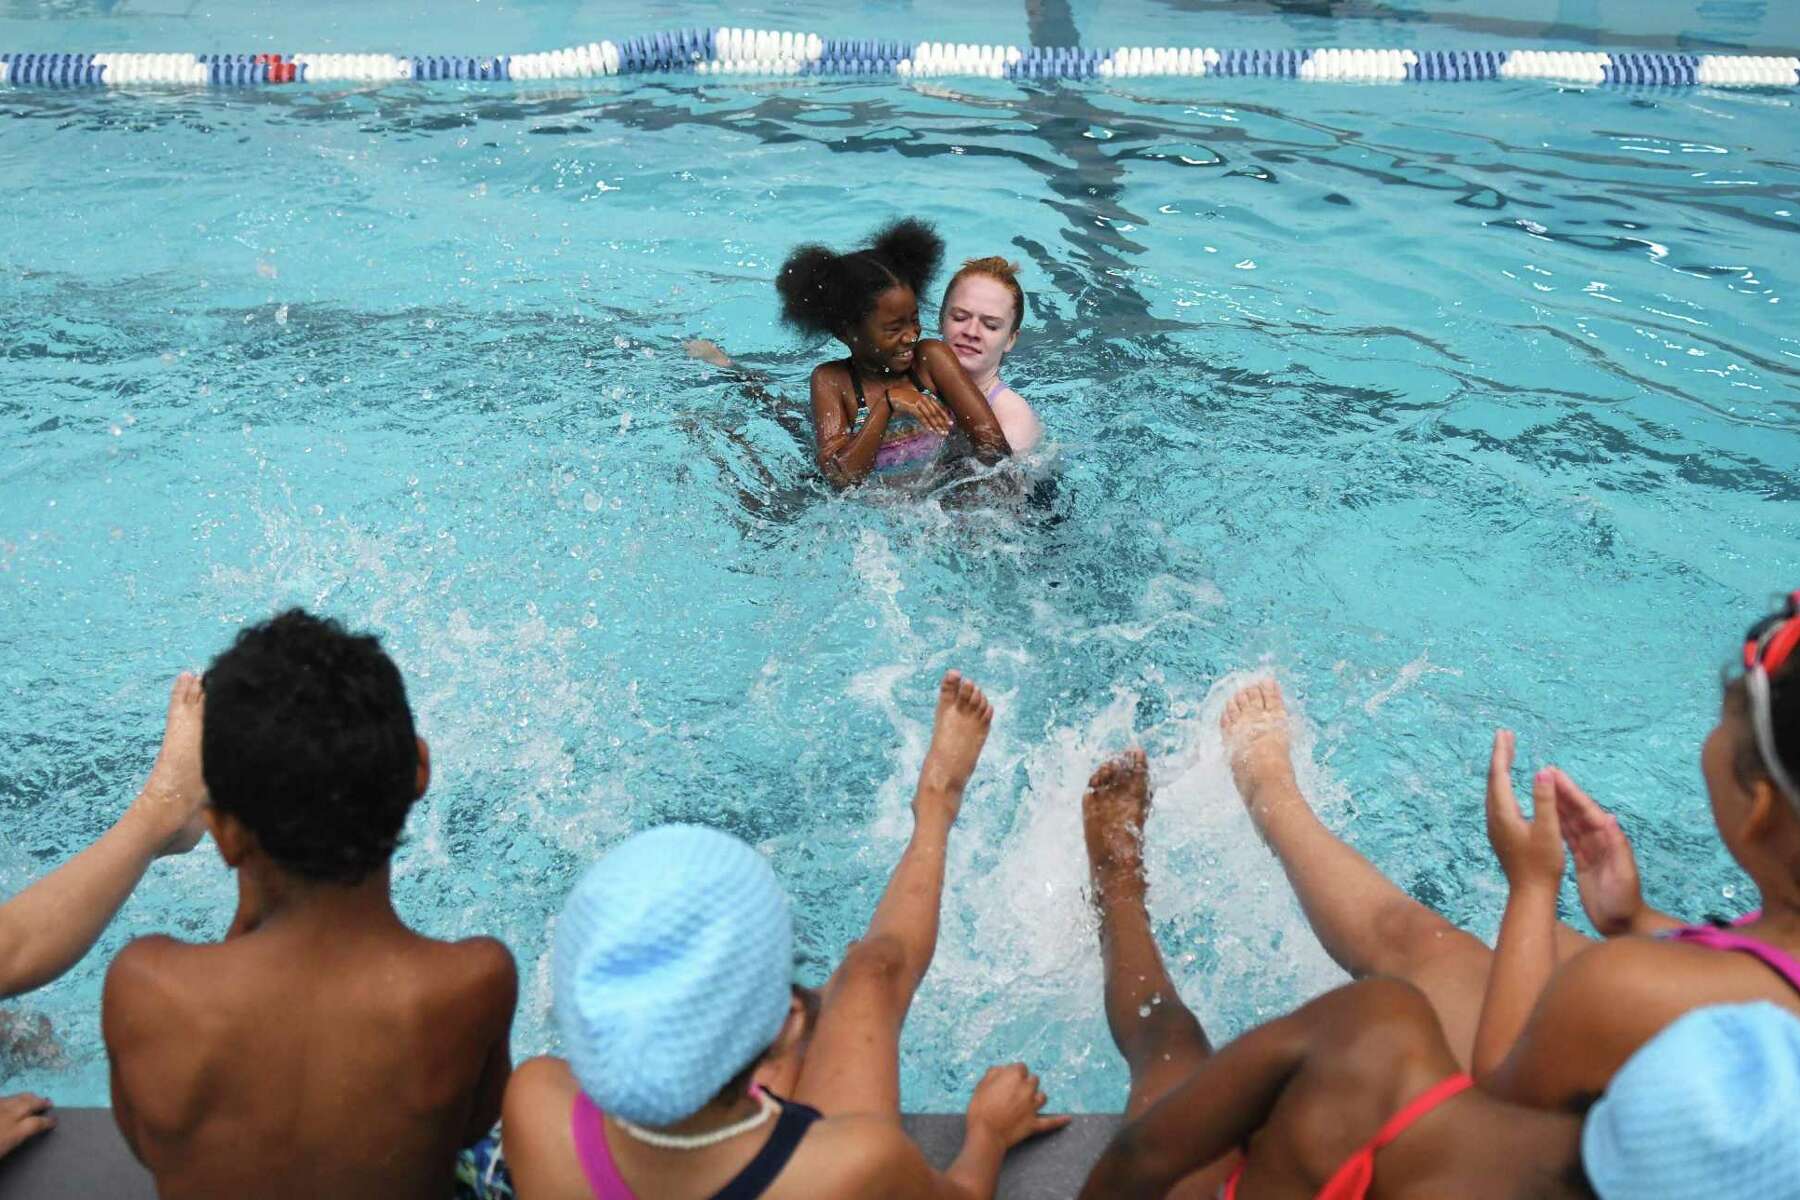 Water Safety Advocate From Greenwich Urges New Pool Owners To Make It Safer For Your Family